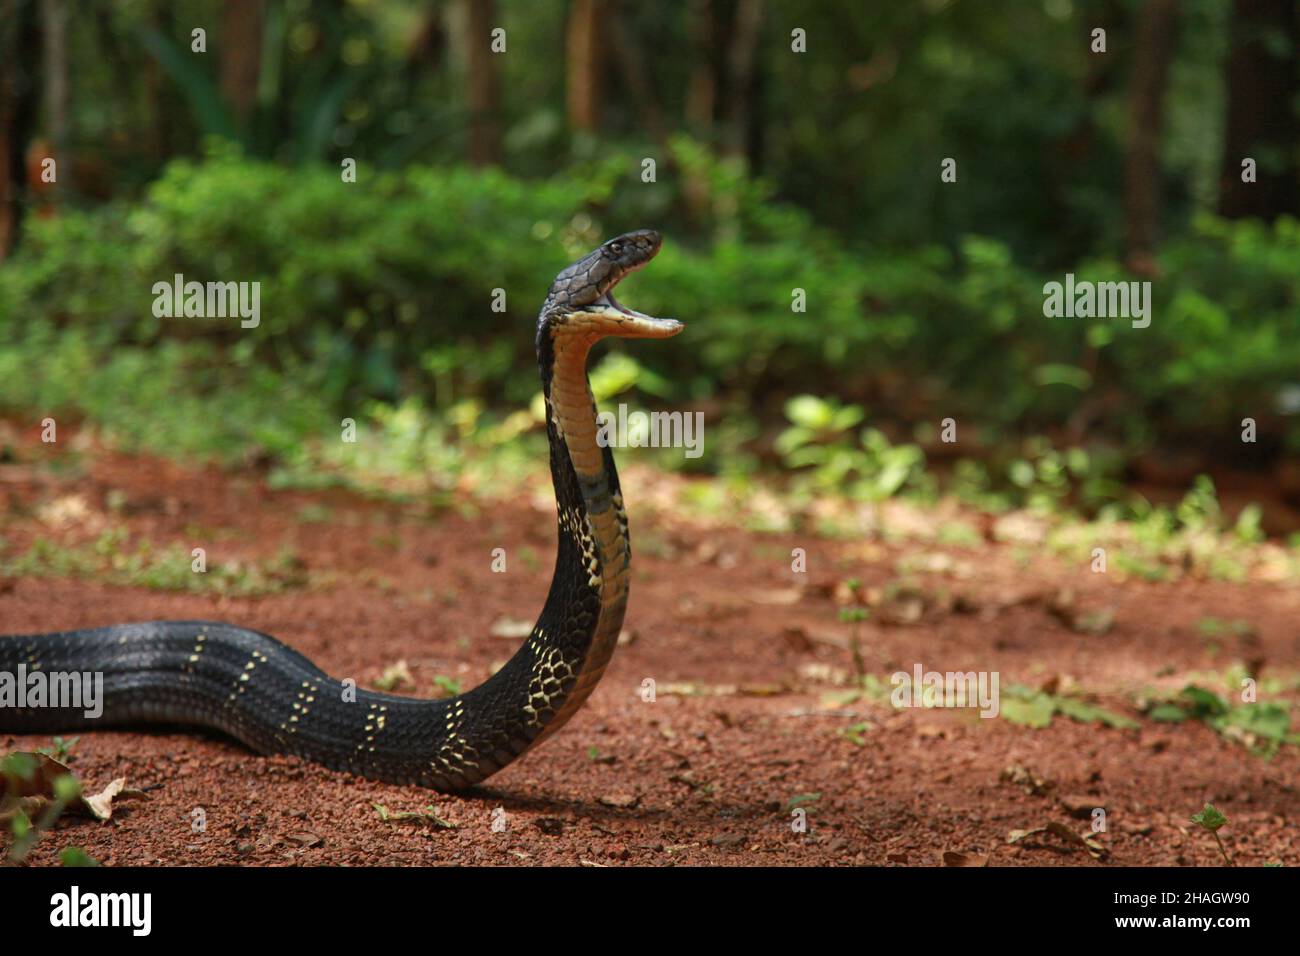 King cobra, Ophiophagus hannah is a venomous snake species of elapids endemic to jungles in Southern and Southeast Asia, goa india Stock Photo